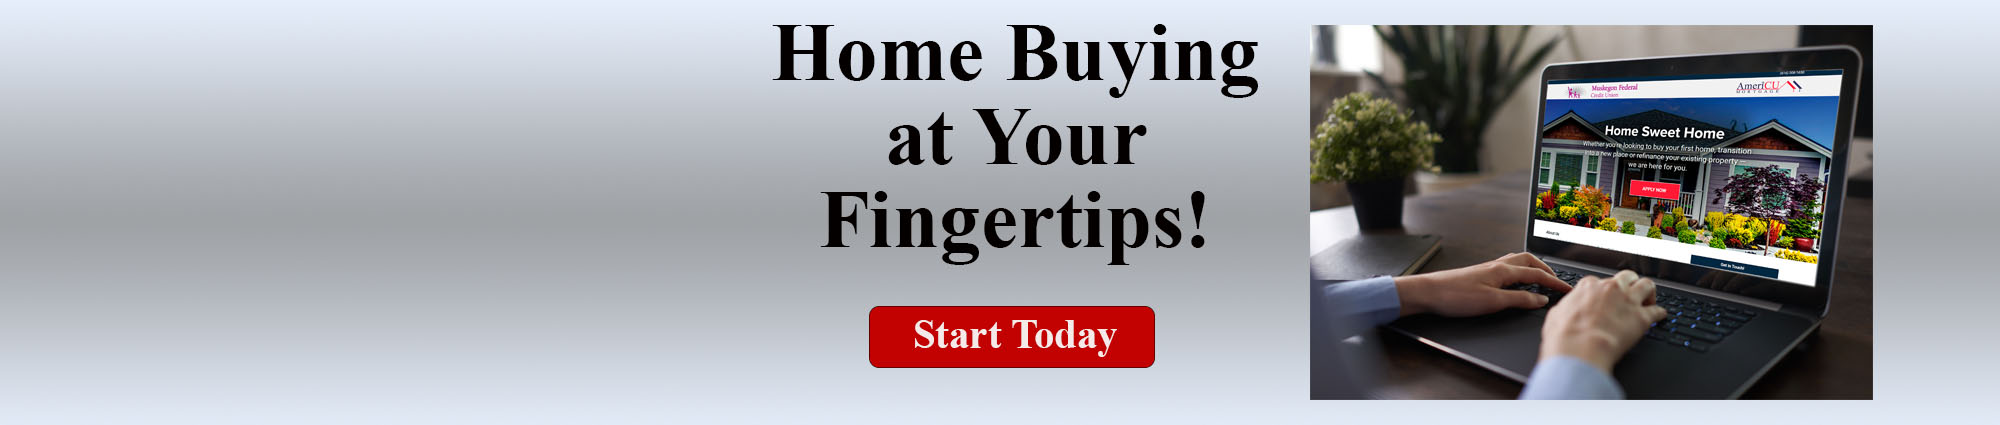 Home buying at your fingertips. Click to start today.